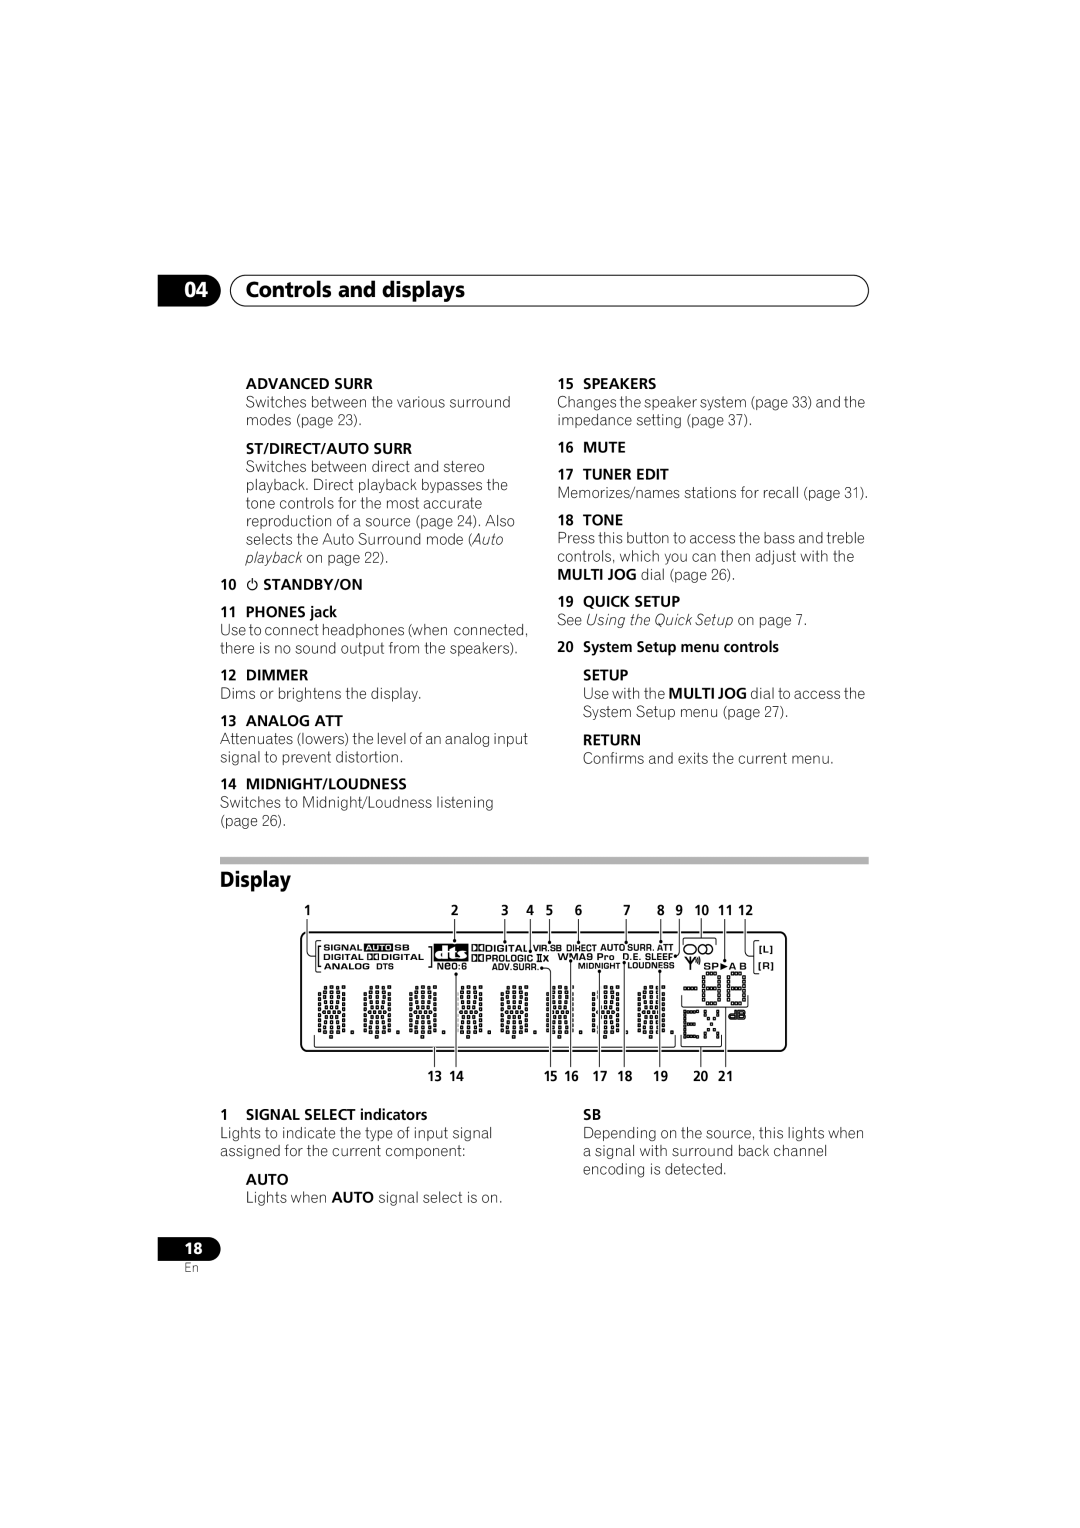 Pioneer VSX-516 operating instructions 04Controls and displays, Display, See Using the Quick Setup on page 